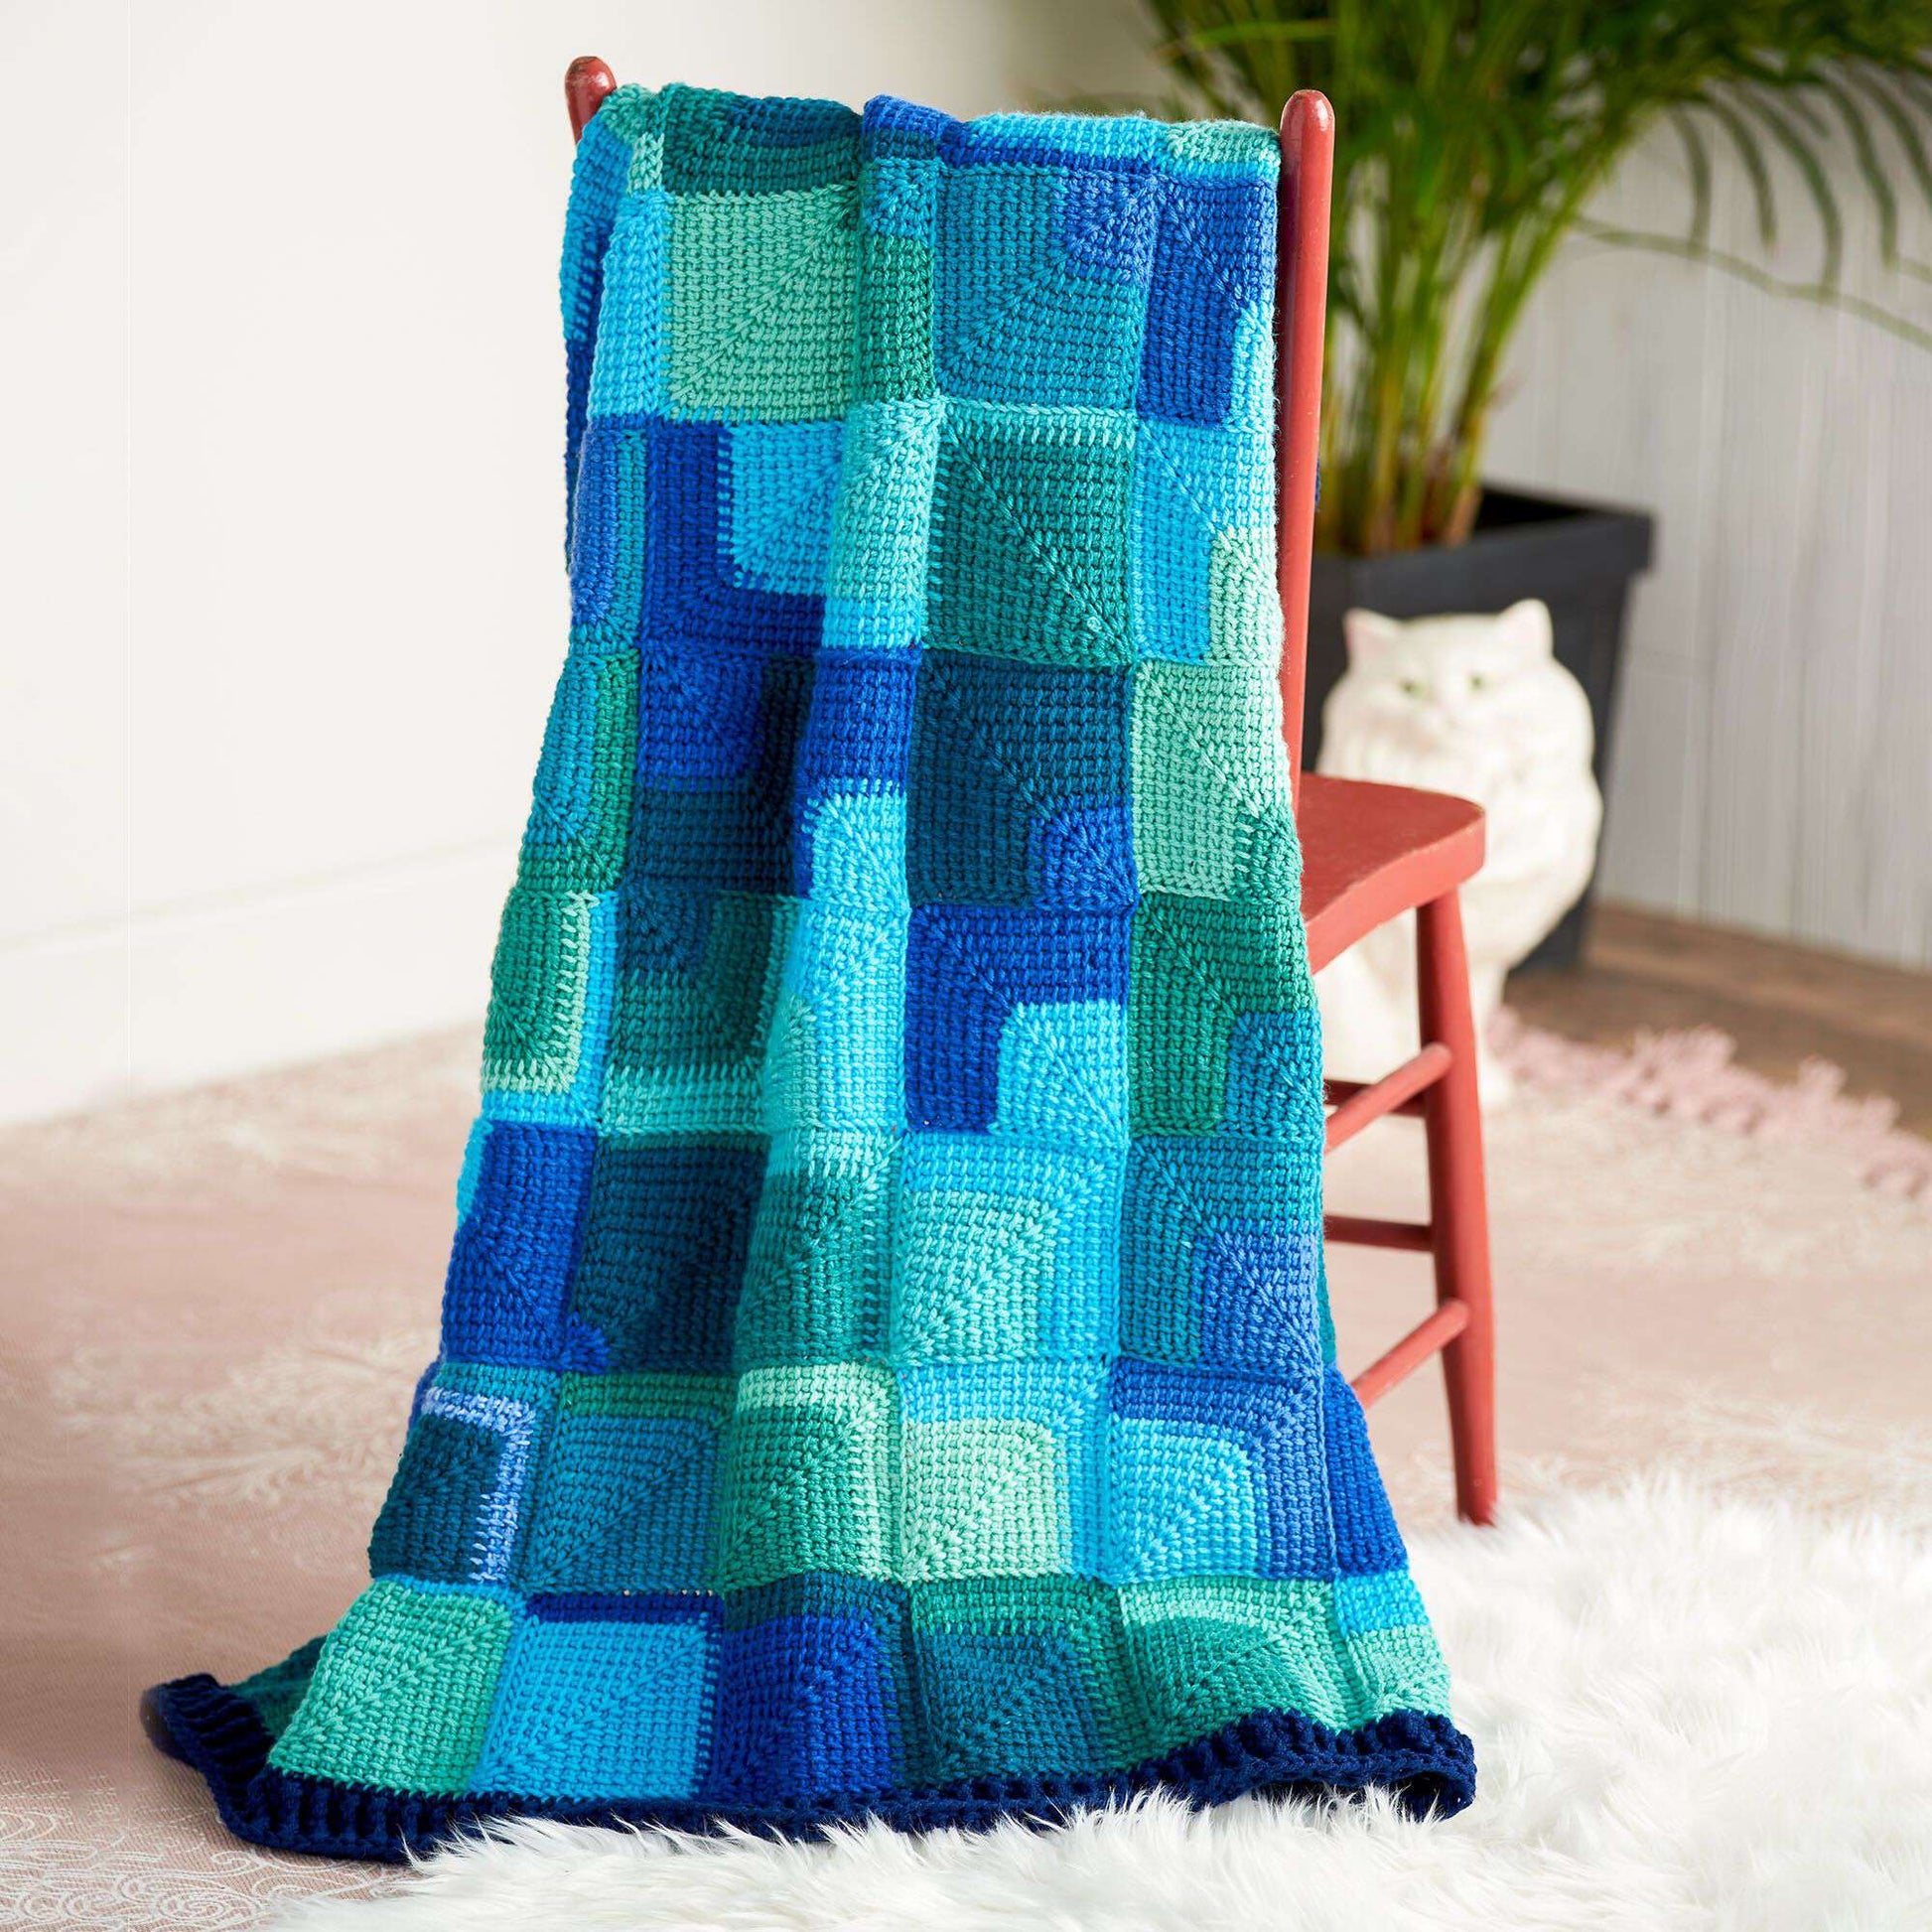 Free Red Heart Modern Squares Throw Crochet Pattern